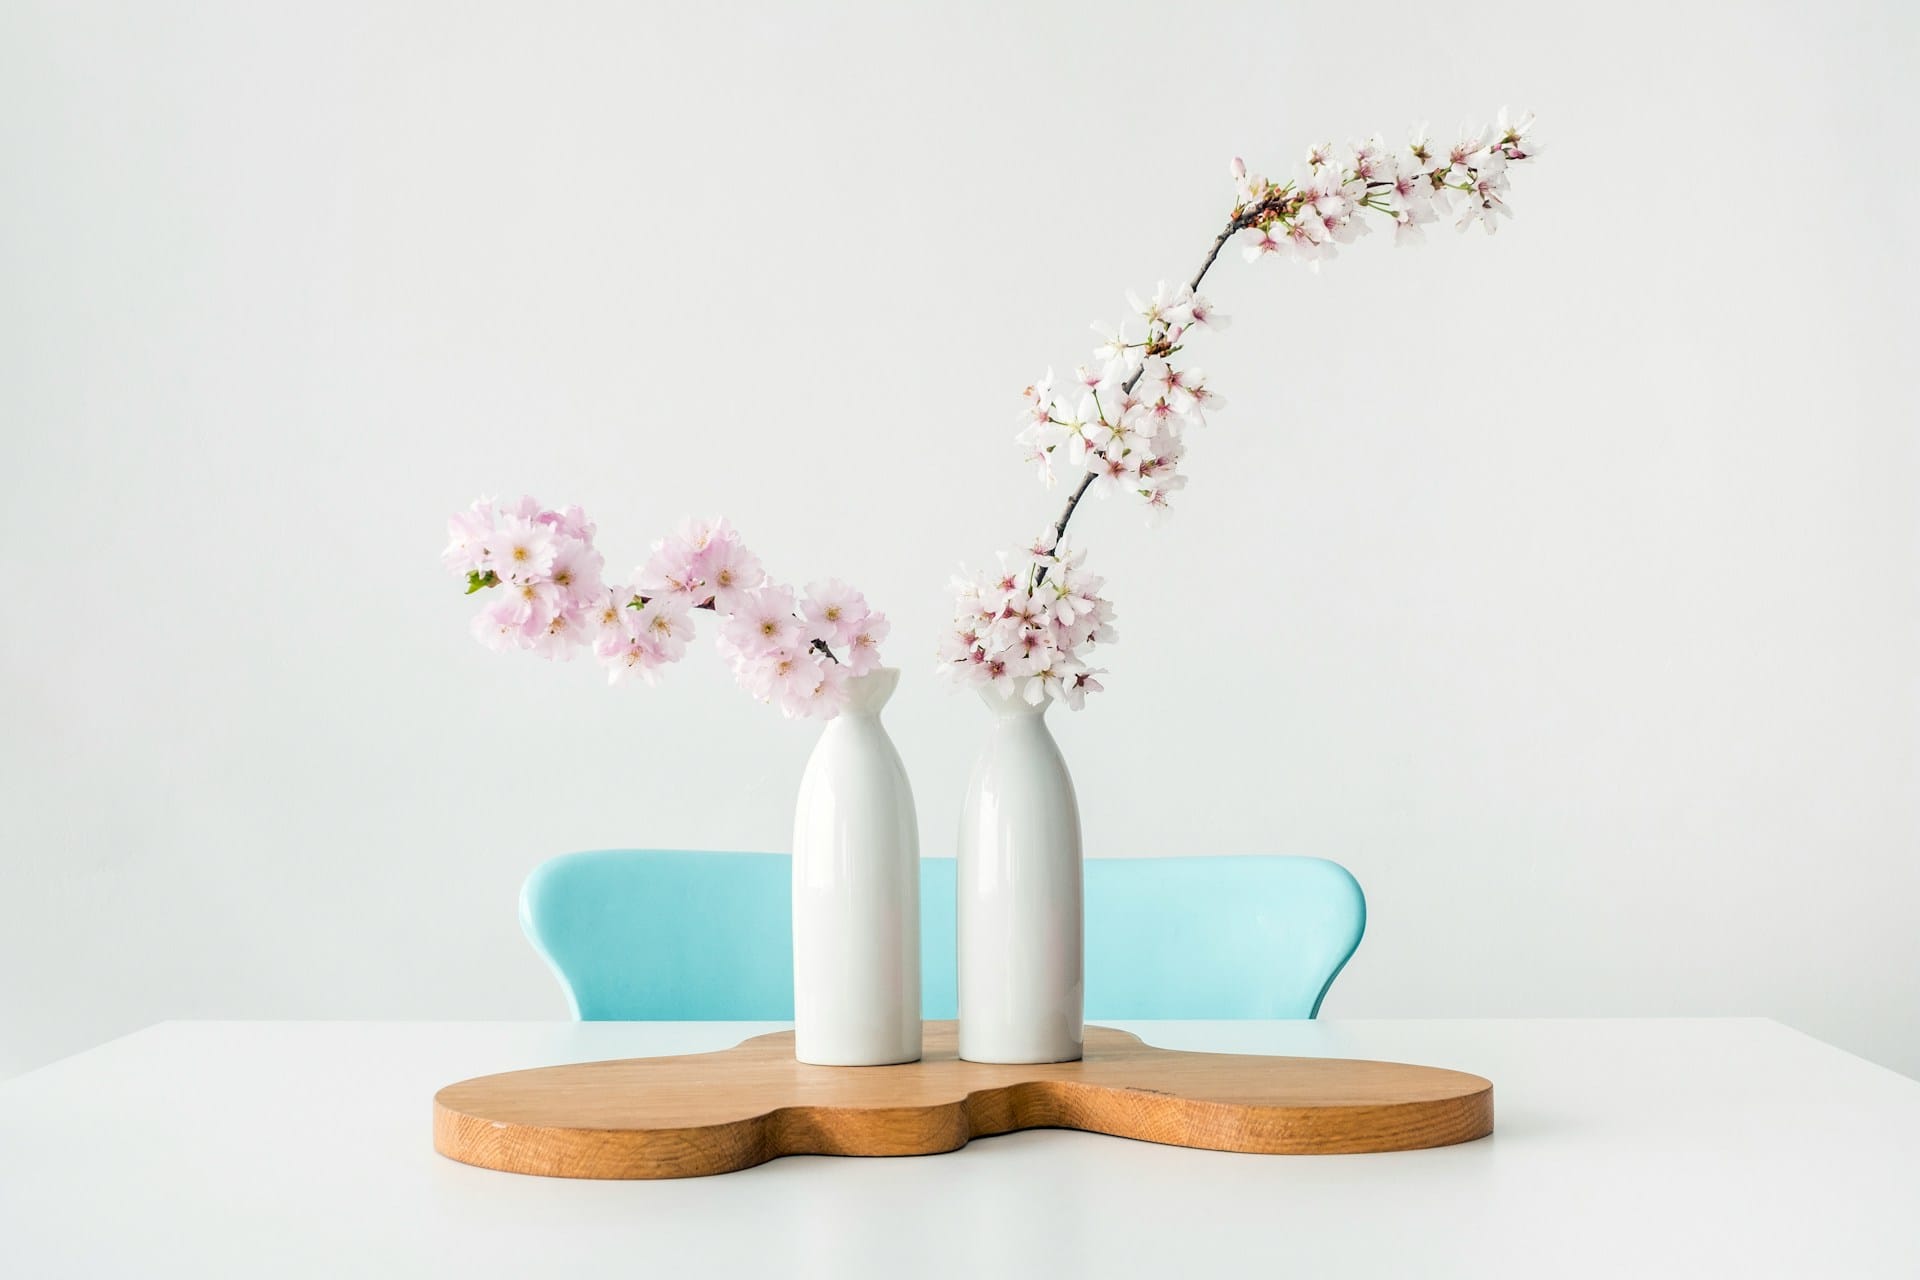 flowers in two vases atop a wooden coaster on a white table with a turquoise blue chair behind